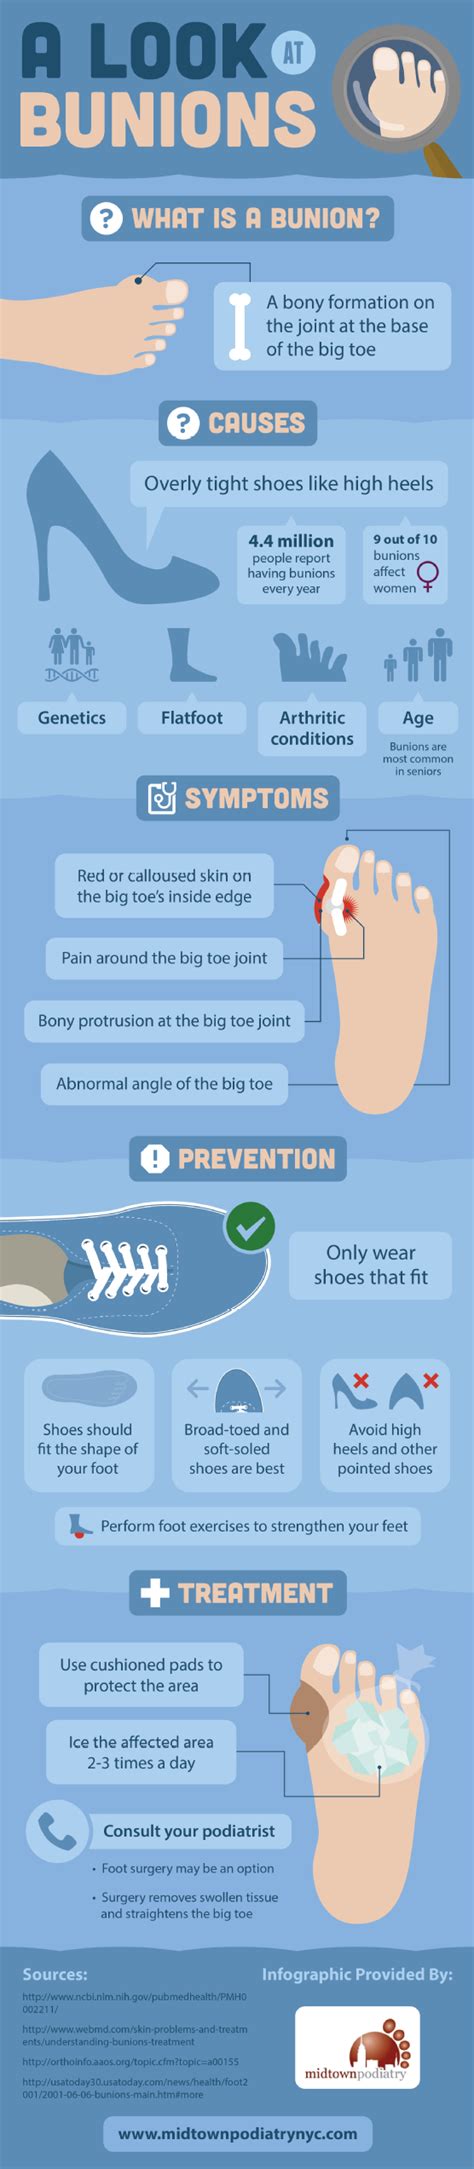 How To Prevent Bunions From Getting Worse Hrfnd